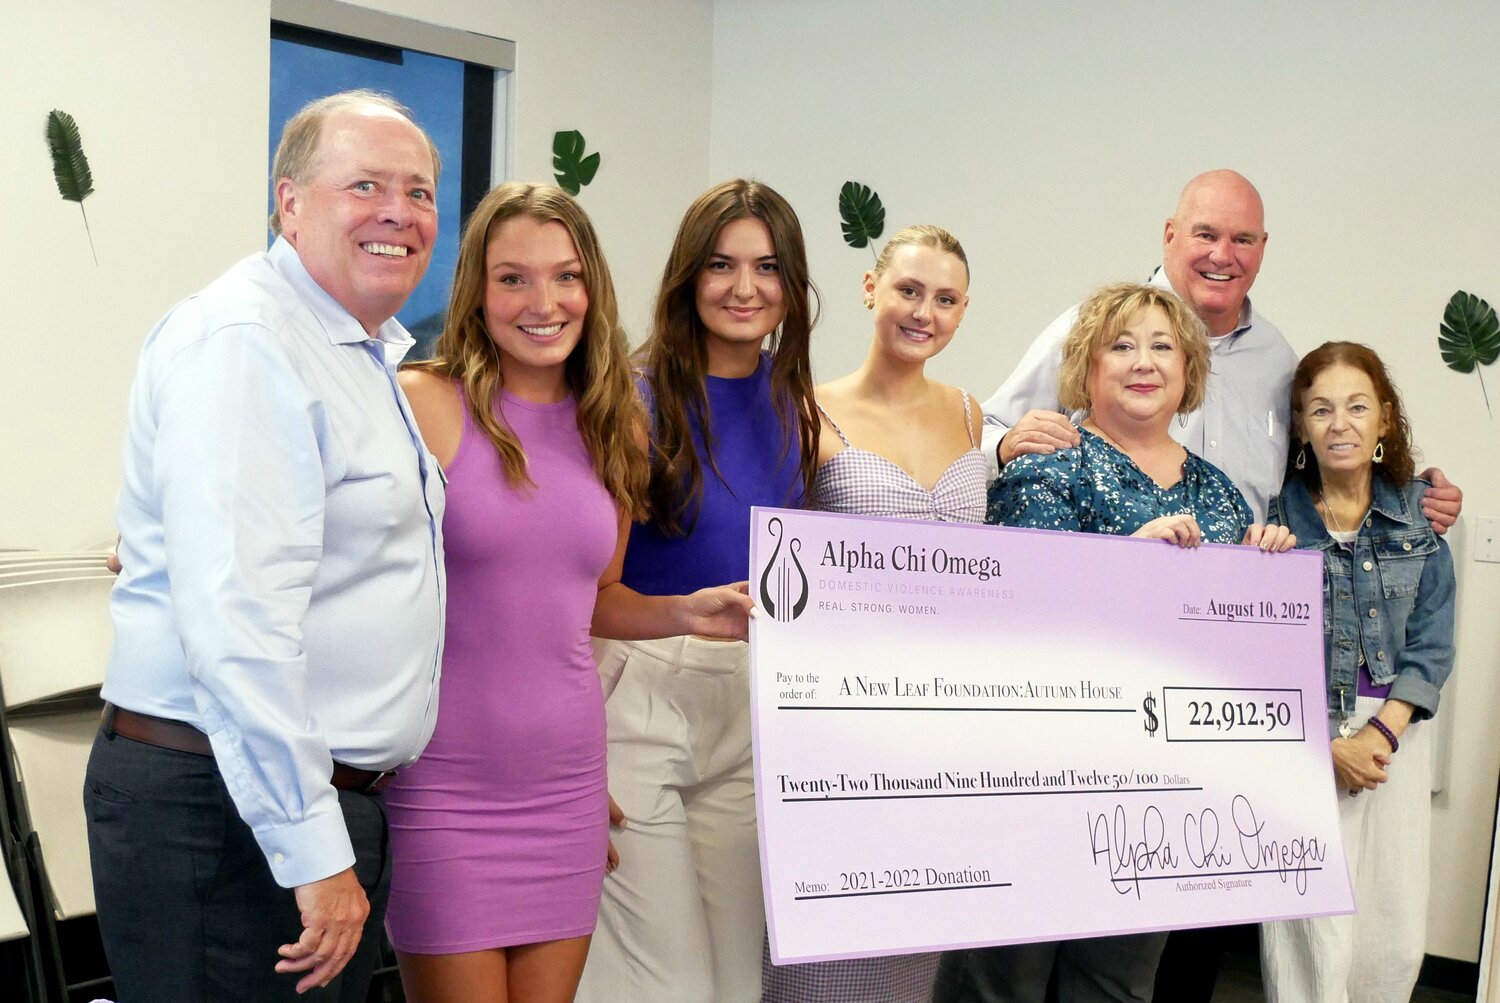 In 2022, ASU's Alpha Chi Omega sorority donated over $22,000 to A New Leaf to support its efforts with victims of domestic violence.